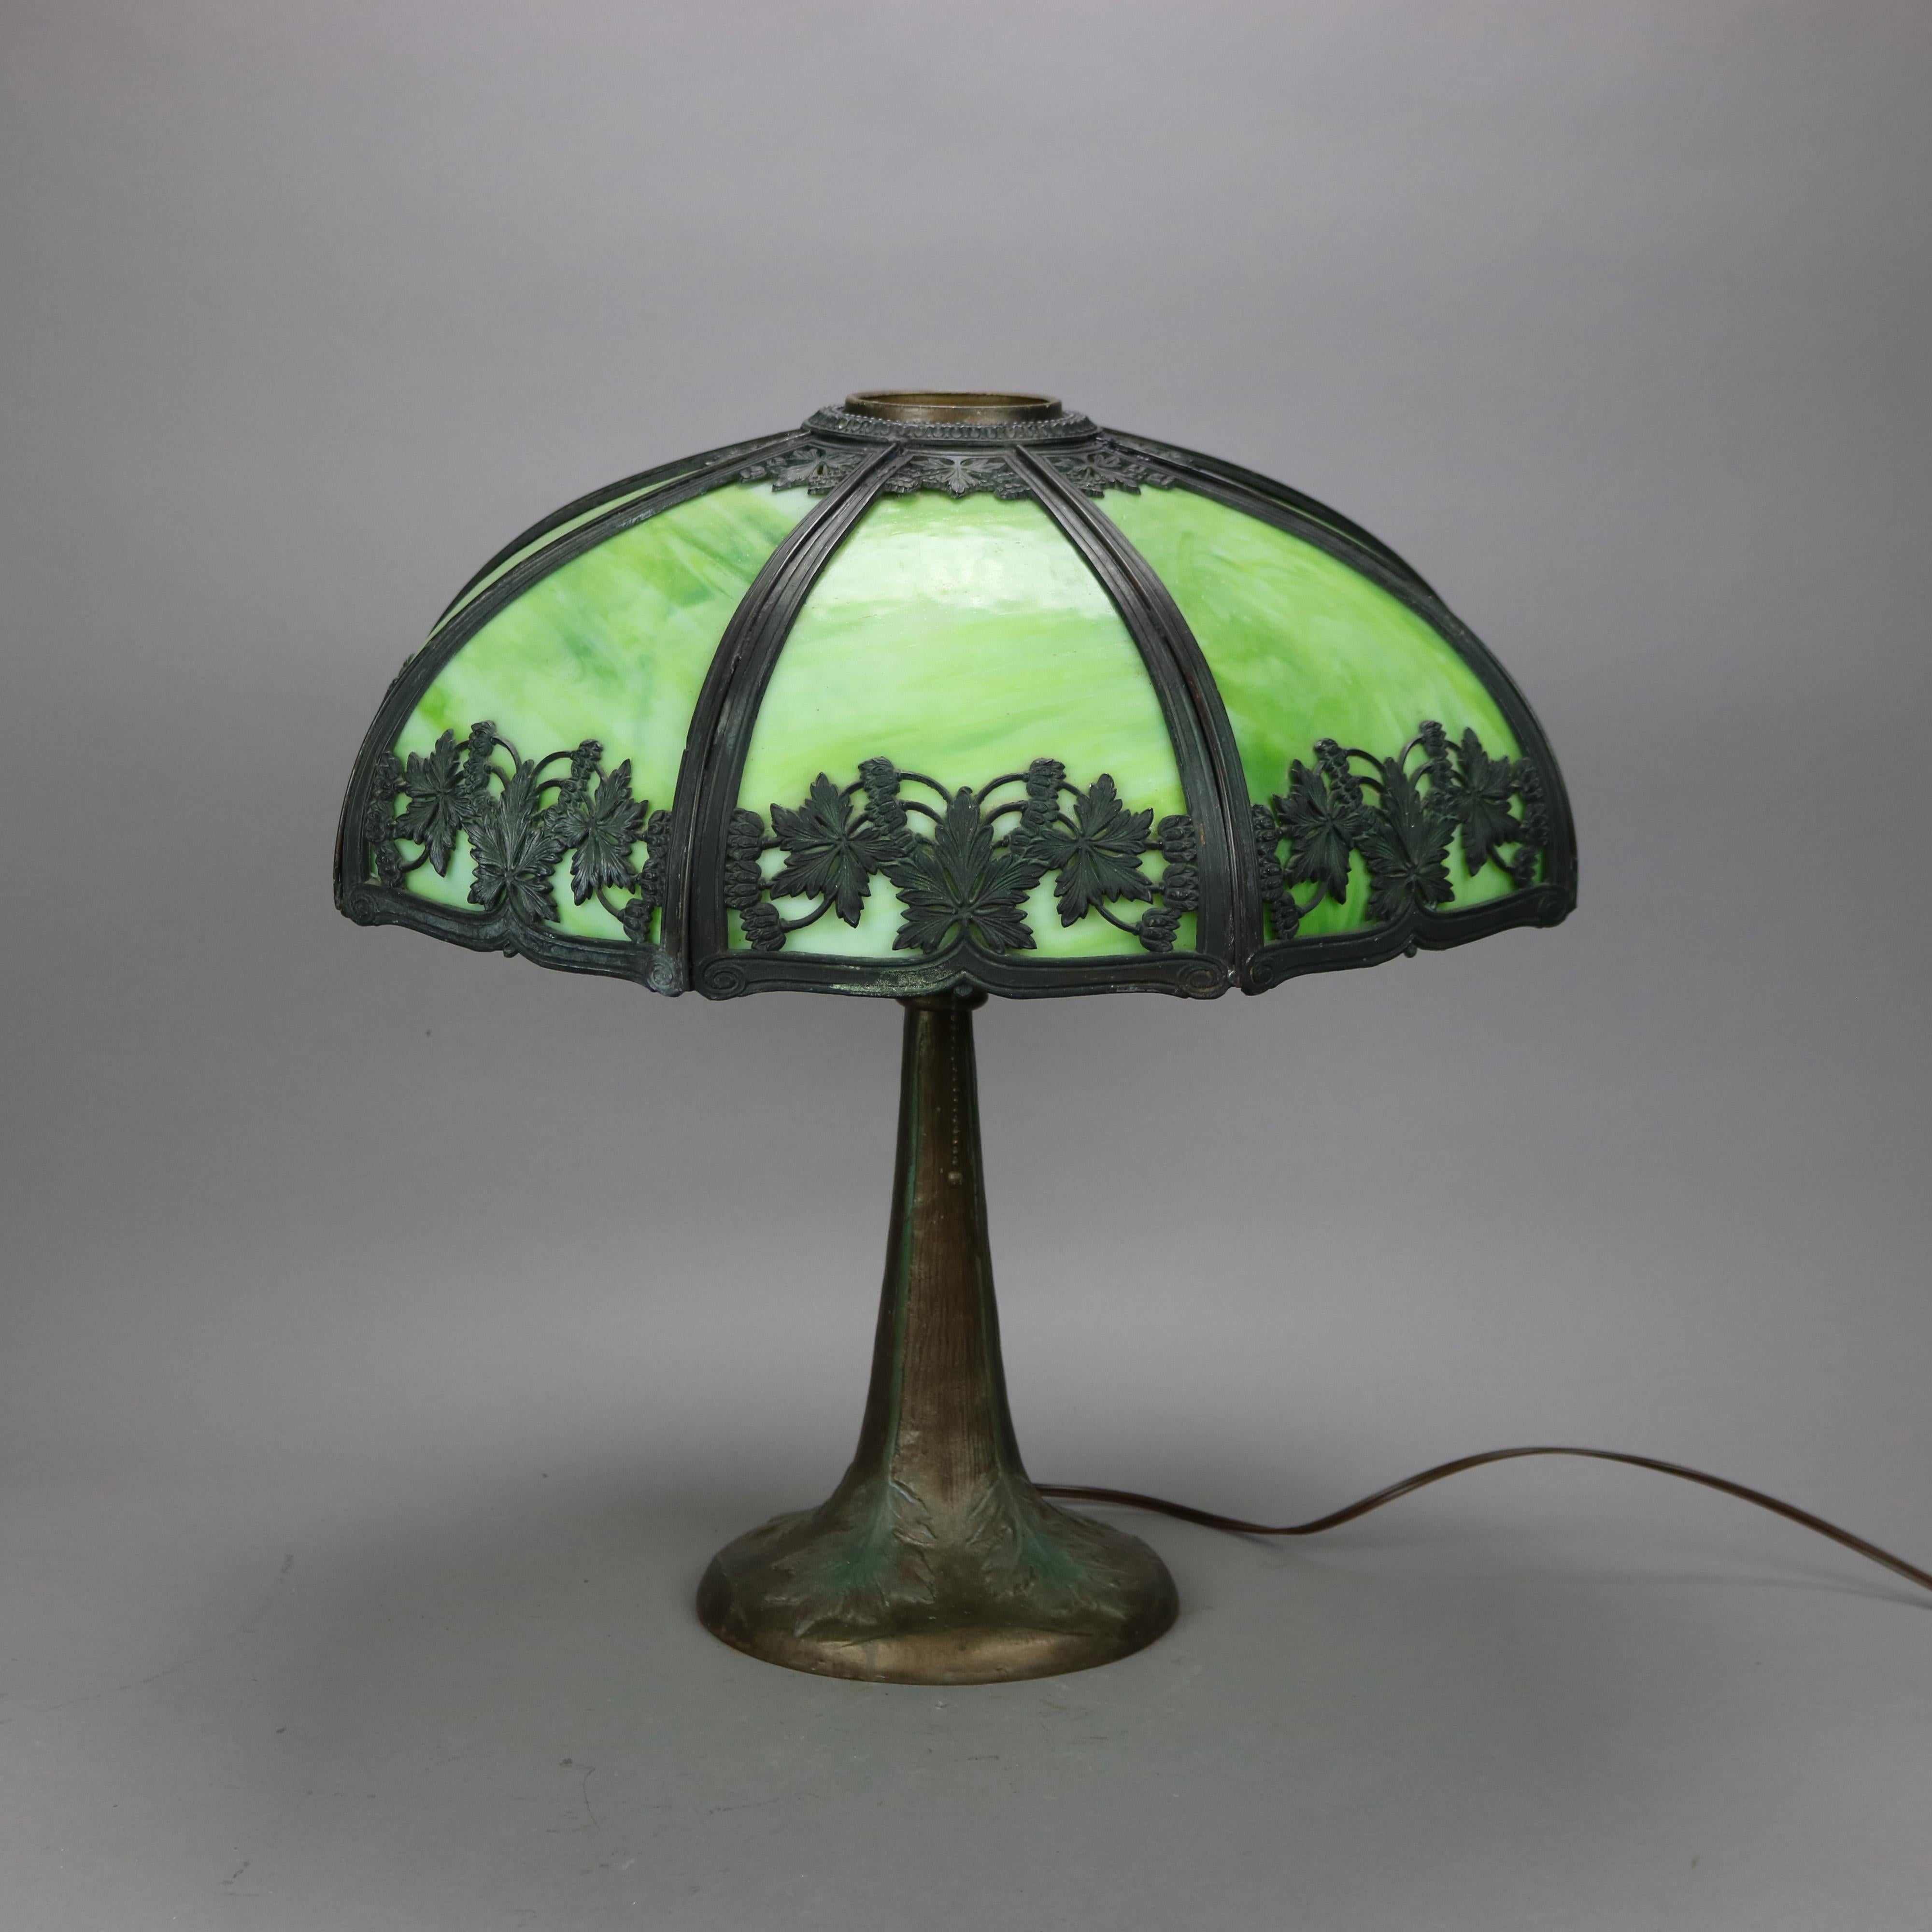 An antique Arts & Crafts table lamp in the manner of Bradley and Hubbard offers filigree cast shade with a leaf and vine pattern over double socket cast base having foliate elements in relief, c1920

Measures - 19'' H x 20.25'' W x 20.25'' D.